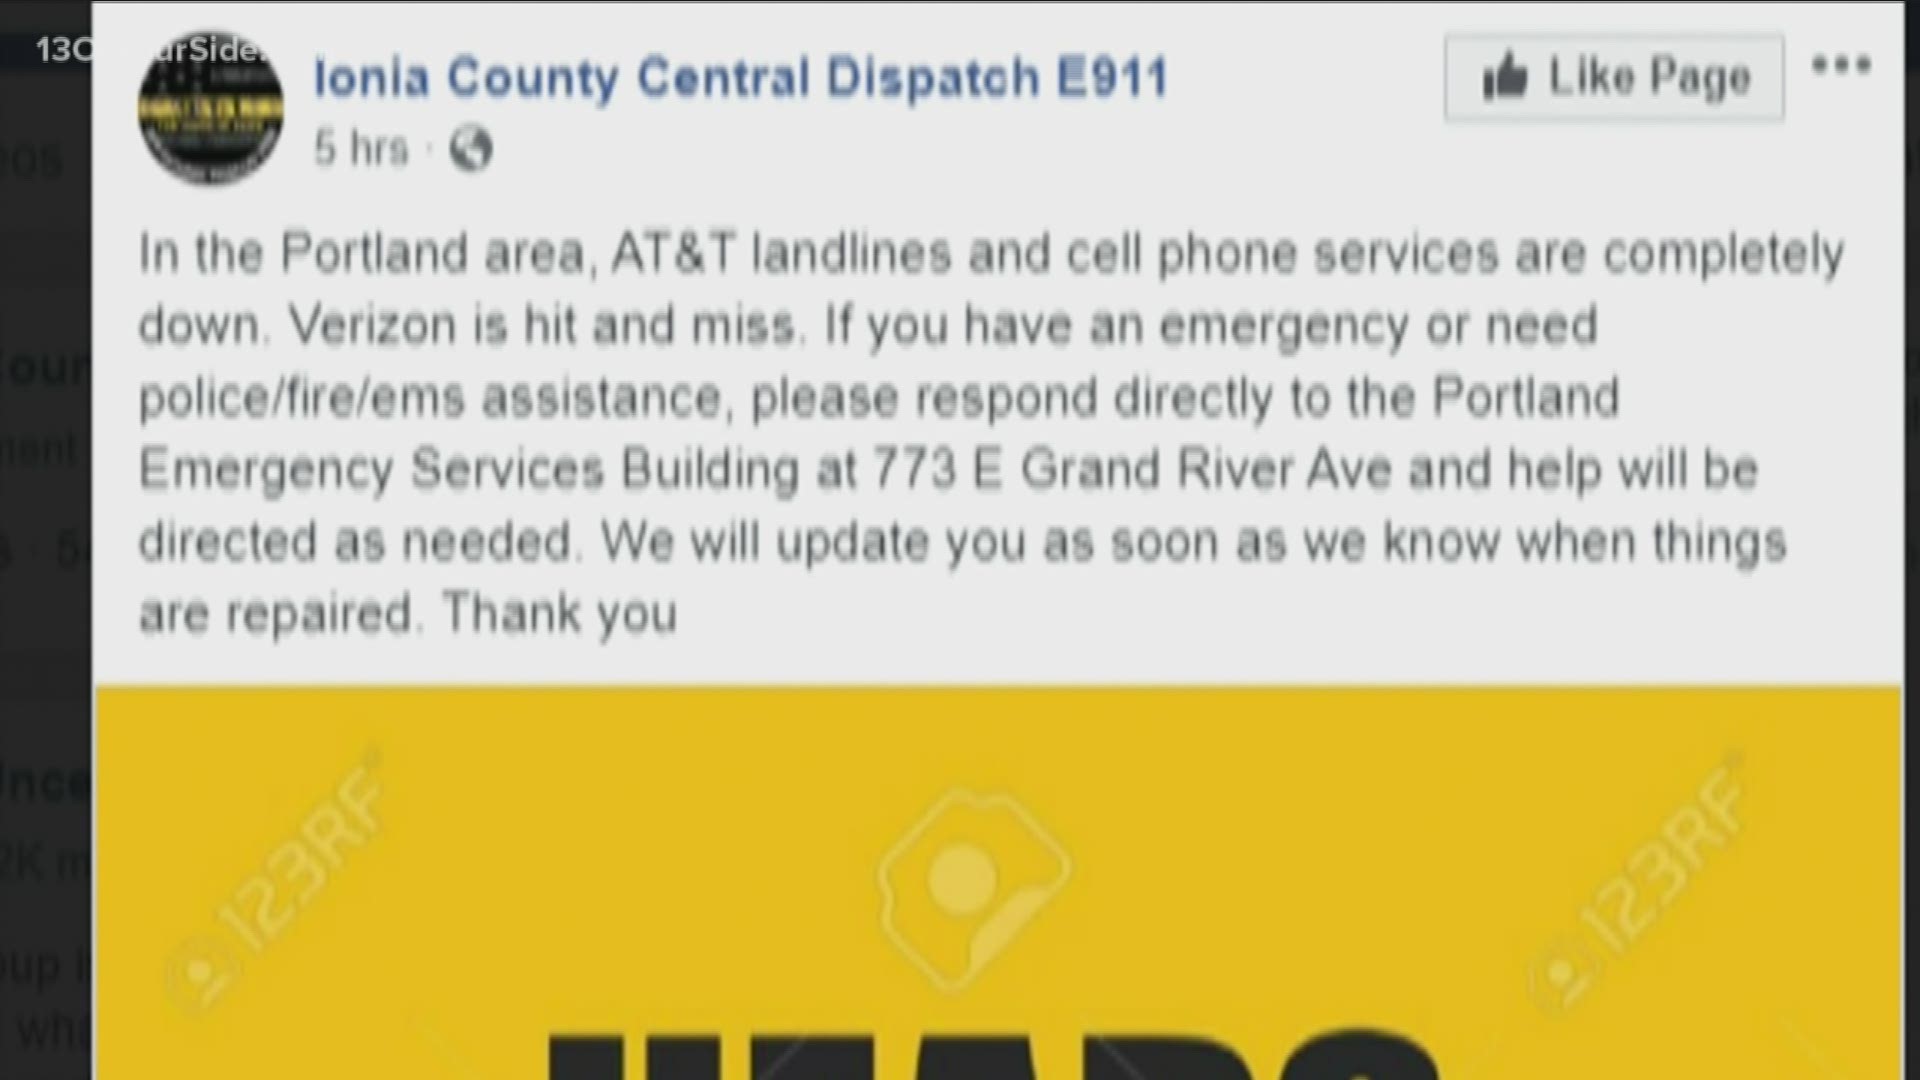 If you live in the Portland area and you can't use your landline or cell phone, you're not alone.